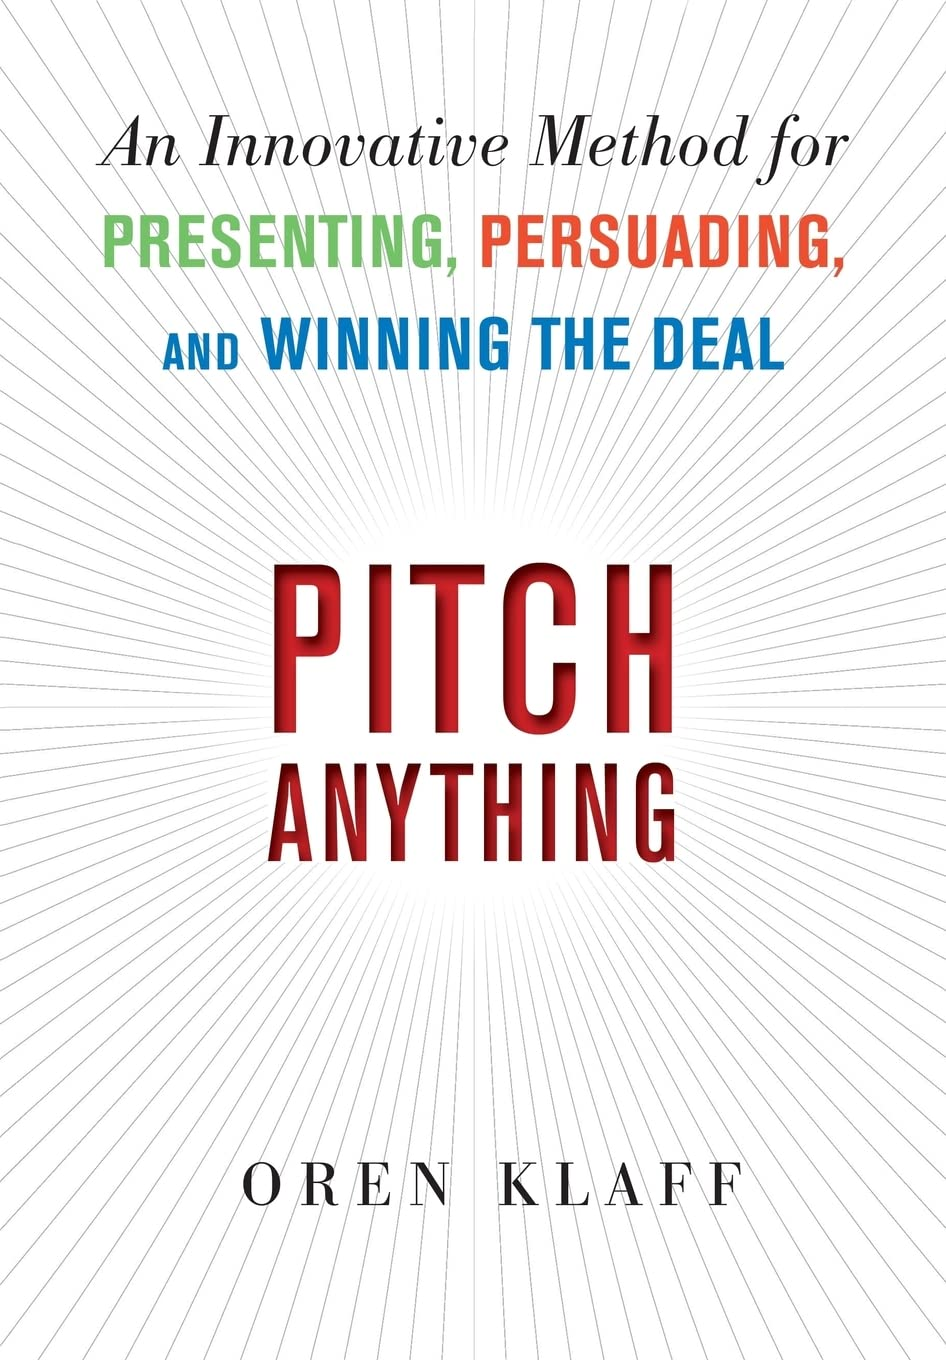 Pitch anything cover